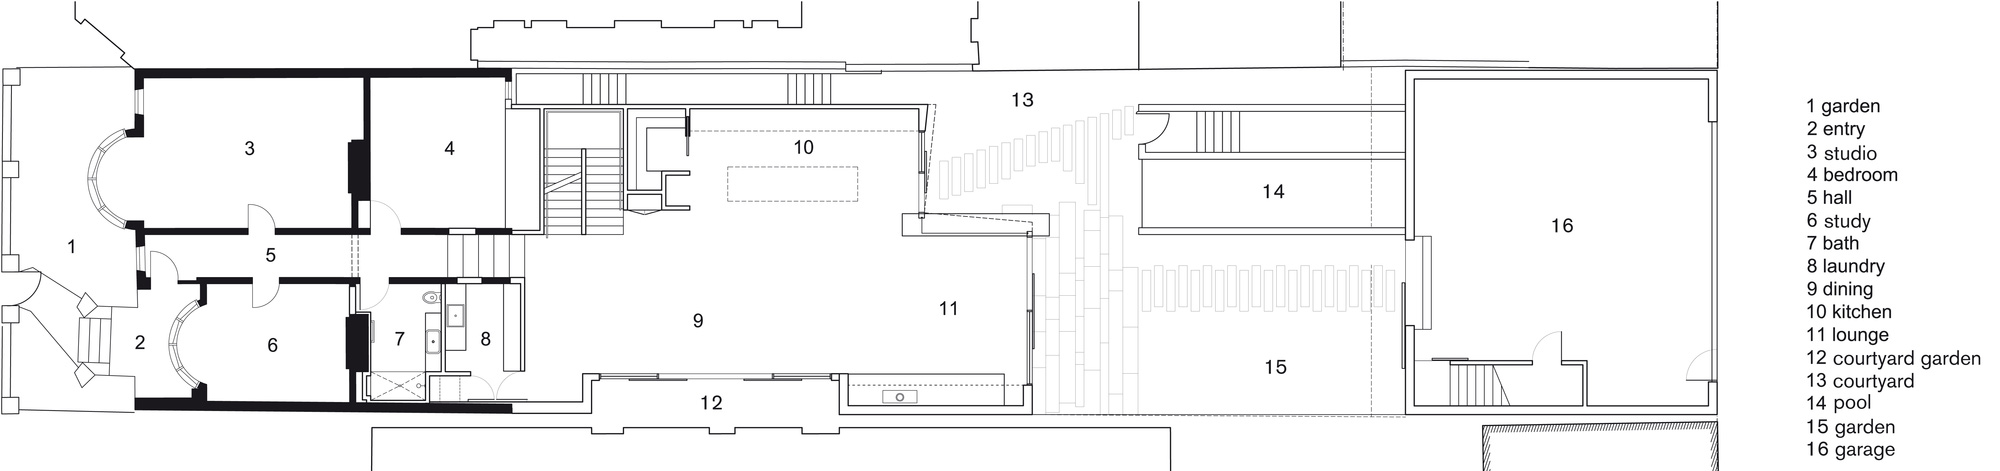 Second Floor Plan, Enclave House in Melbourne, Australia by BKK Architects